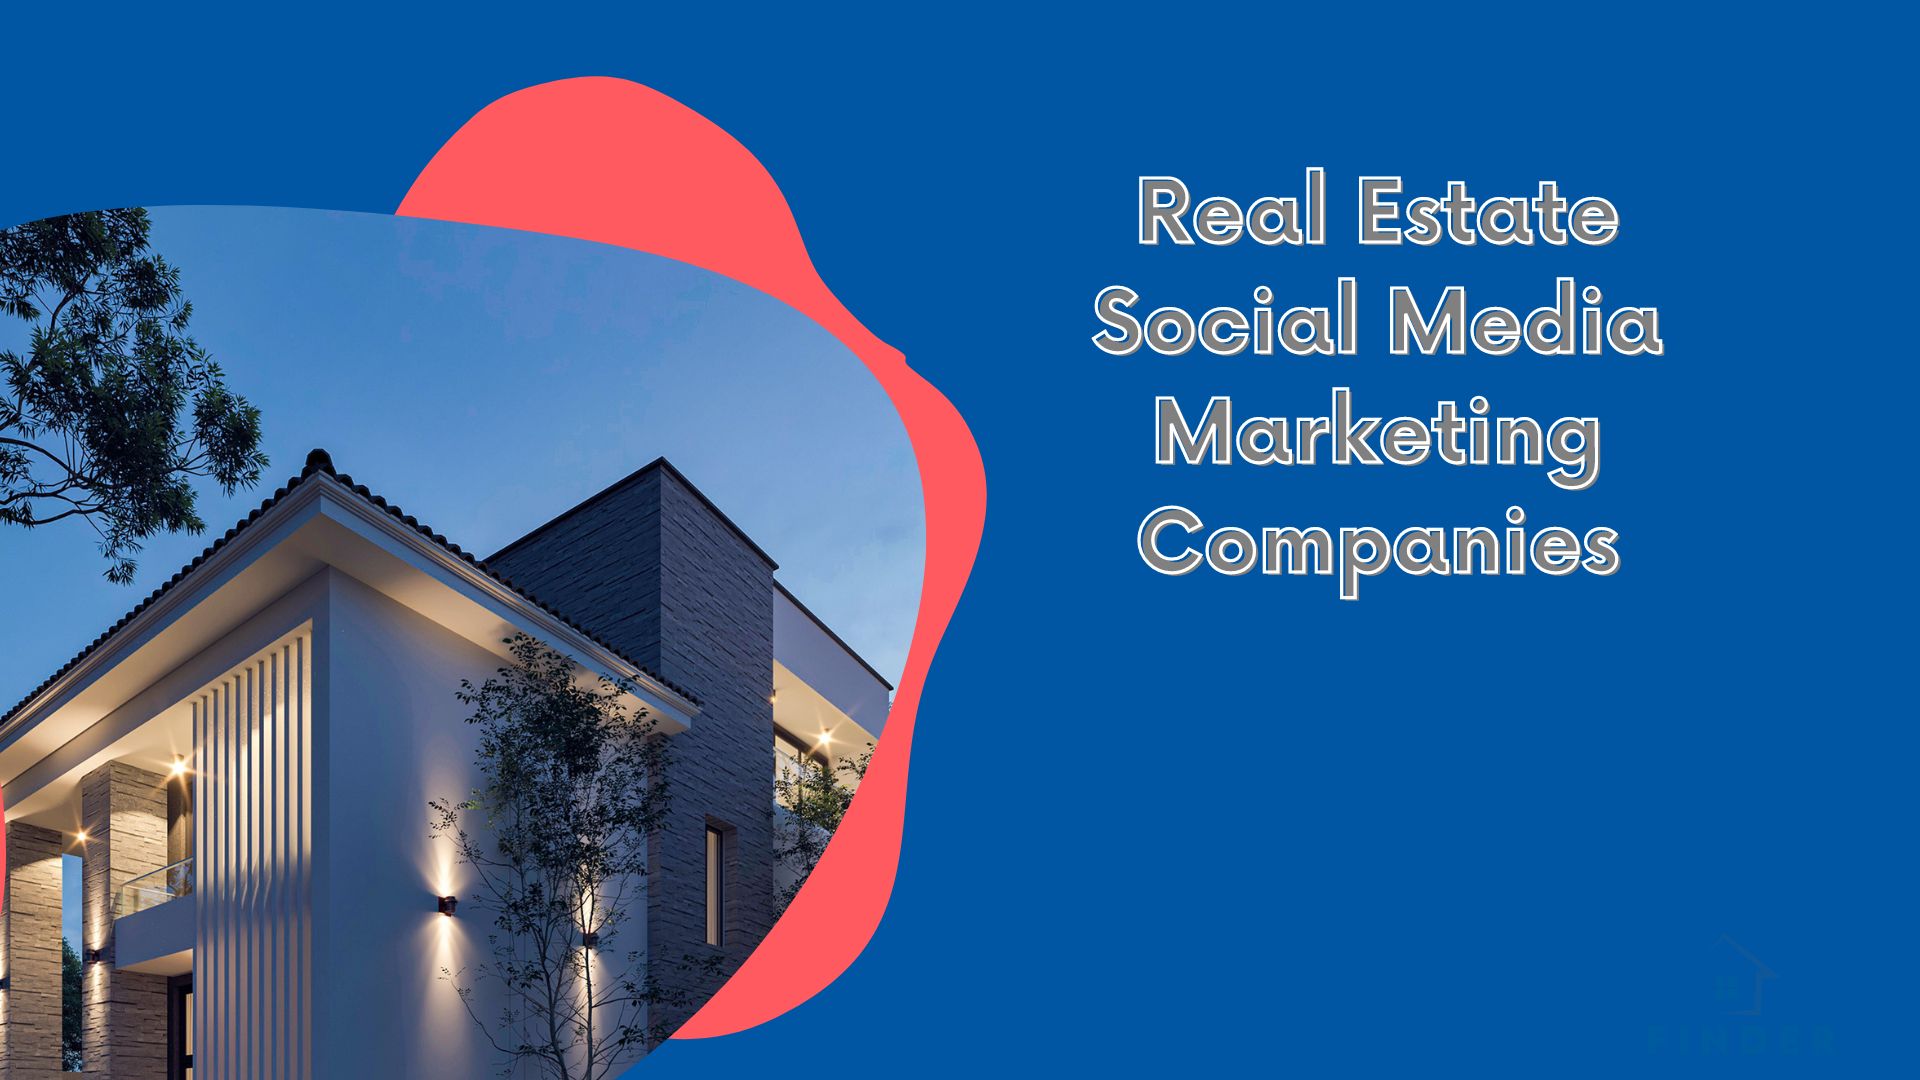 Real Estate Social Media Marketing Companies: How to Choose the Right One for Your Brand